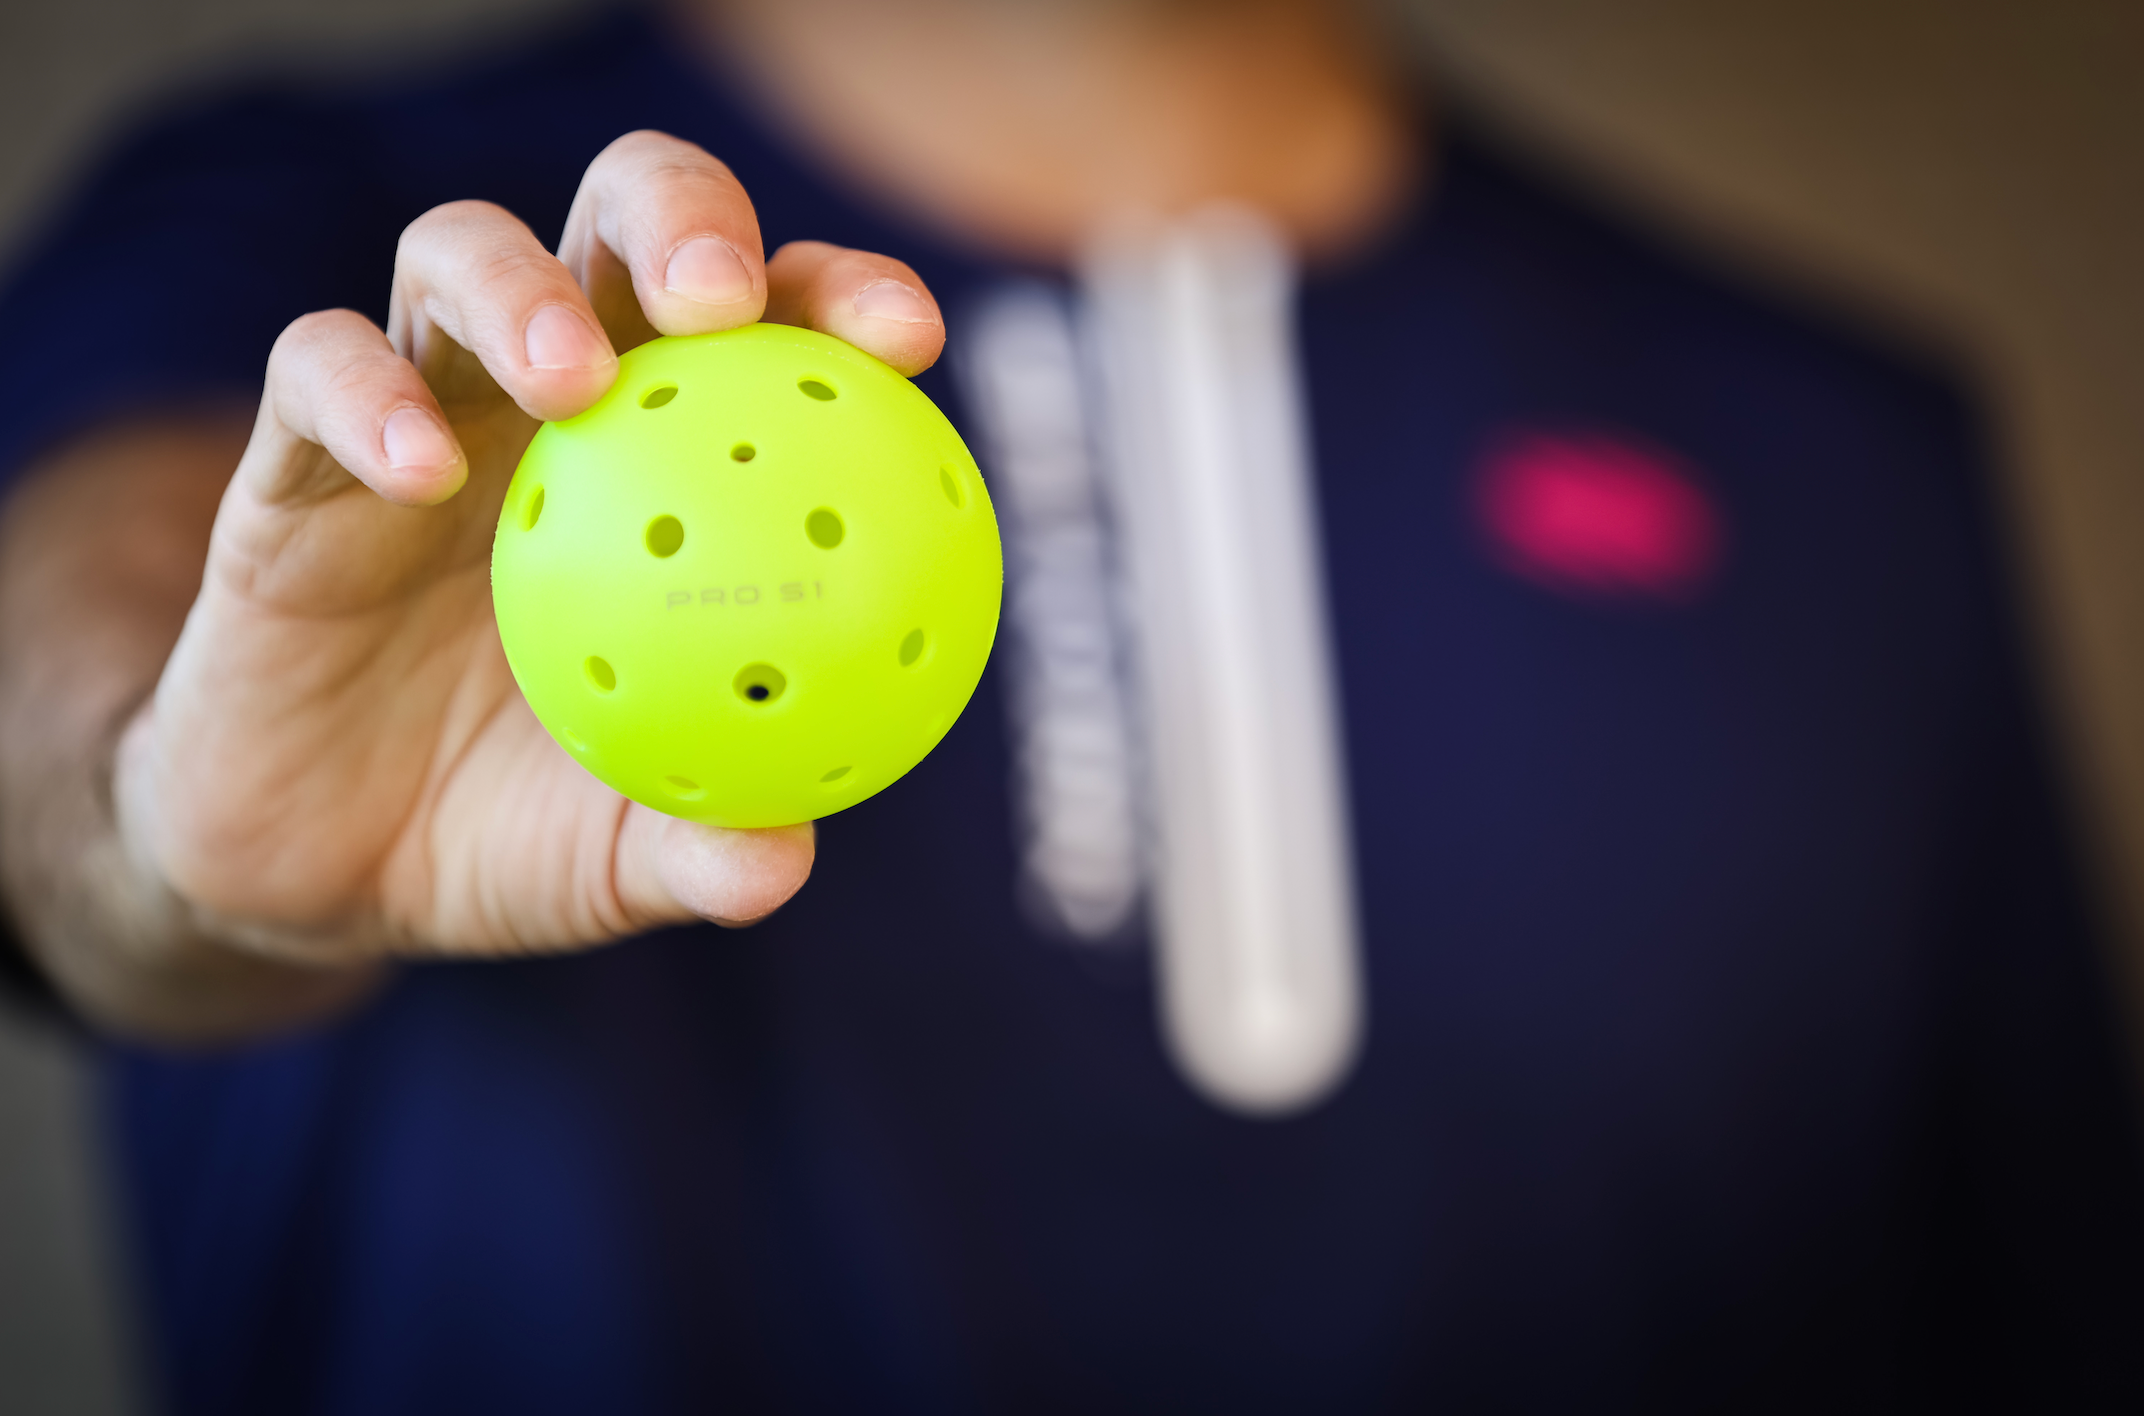 The Pro S1 pickleball features a 38 hole pattern